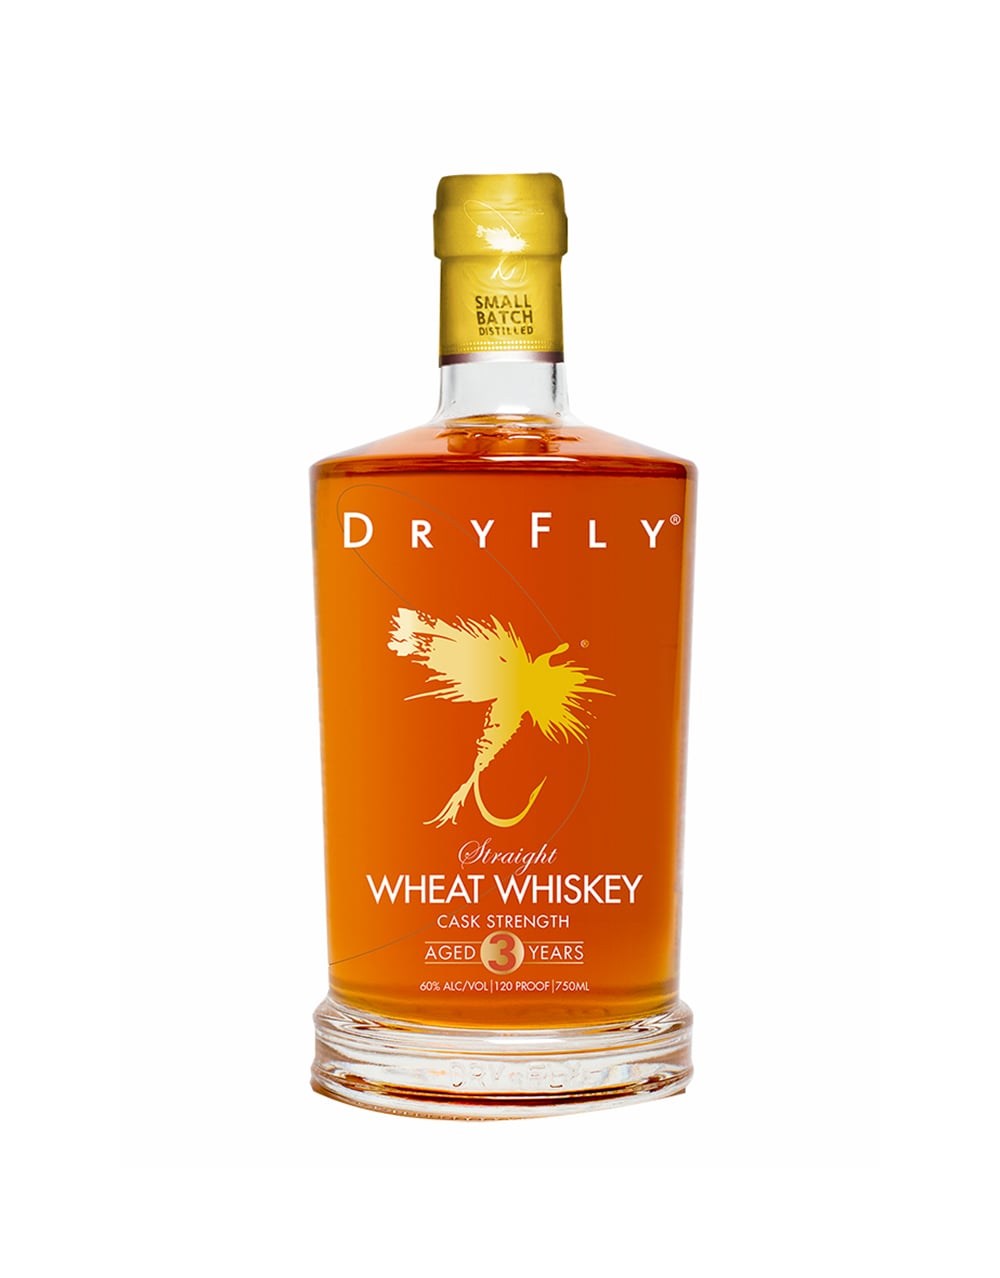 Dry Fly Straight Wheat Whisky Cask Strength  120 Proof 3 year Whisky